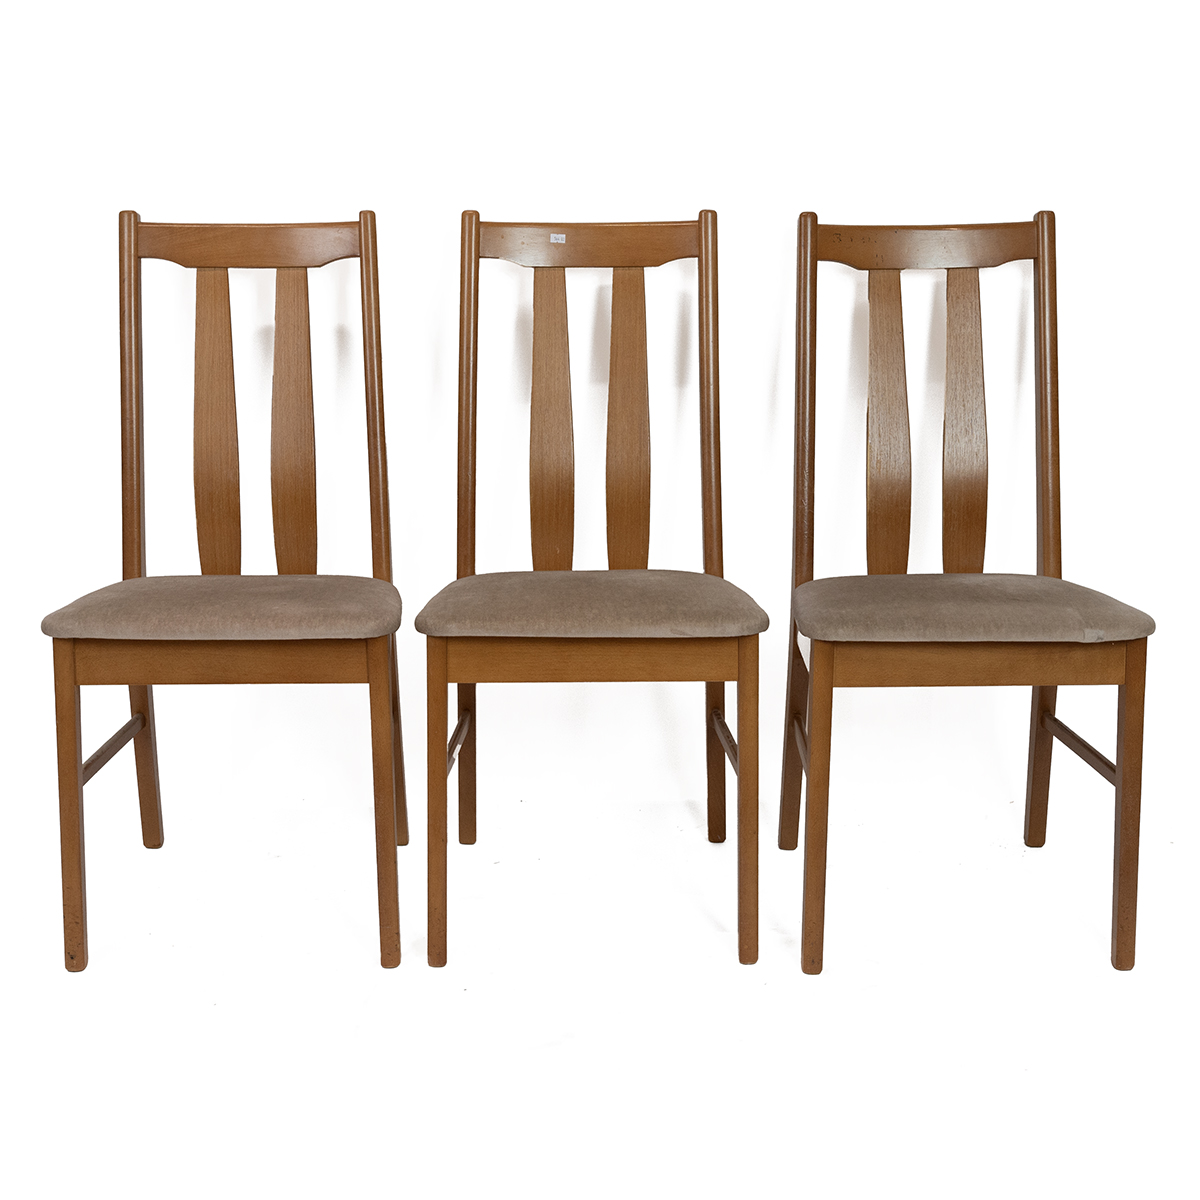 Mid century Nathan beech wood extending dining table and four chairs with three additional chairs... - Image 6 of 6